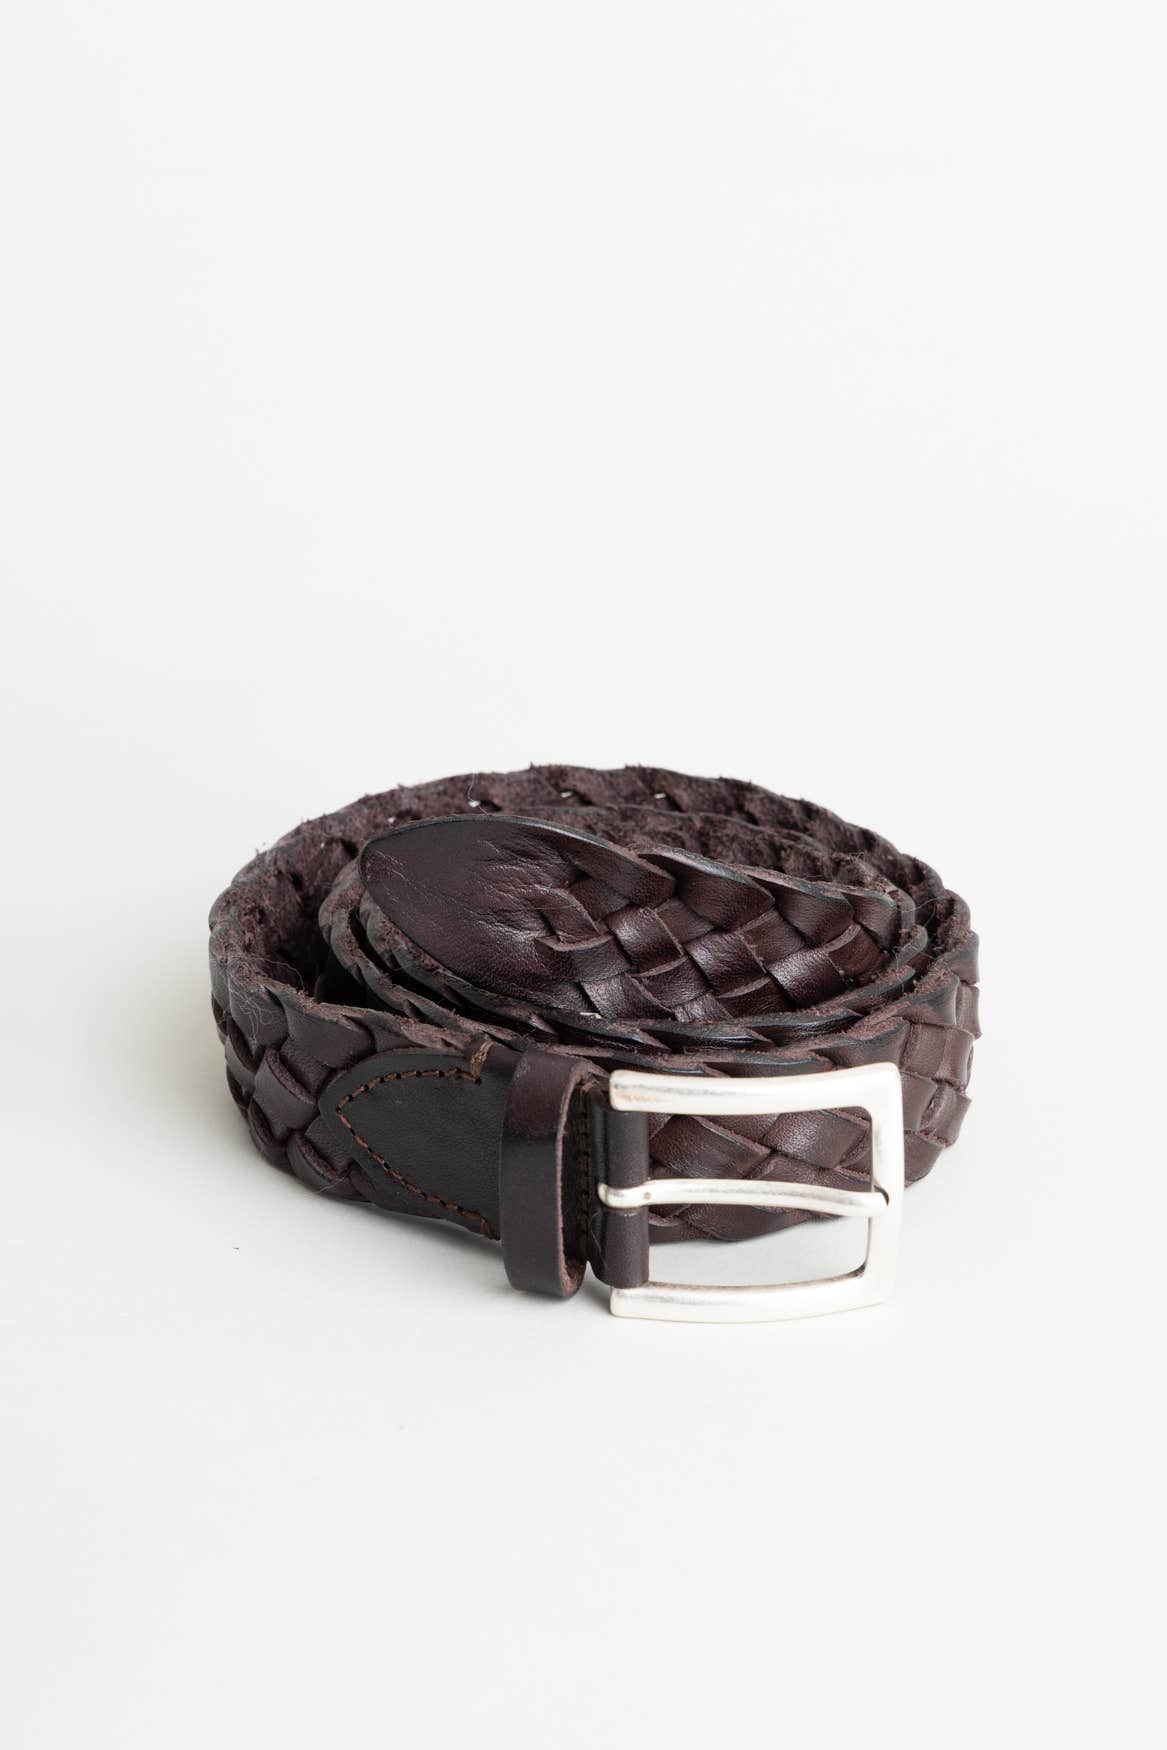 Omega Brown Braided Genuine Leather Belt Size M #8839